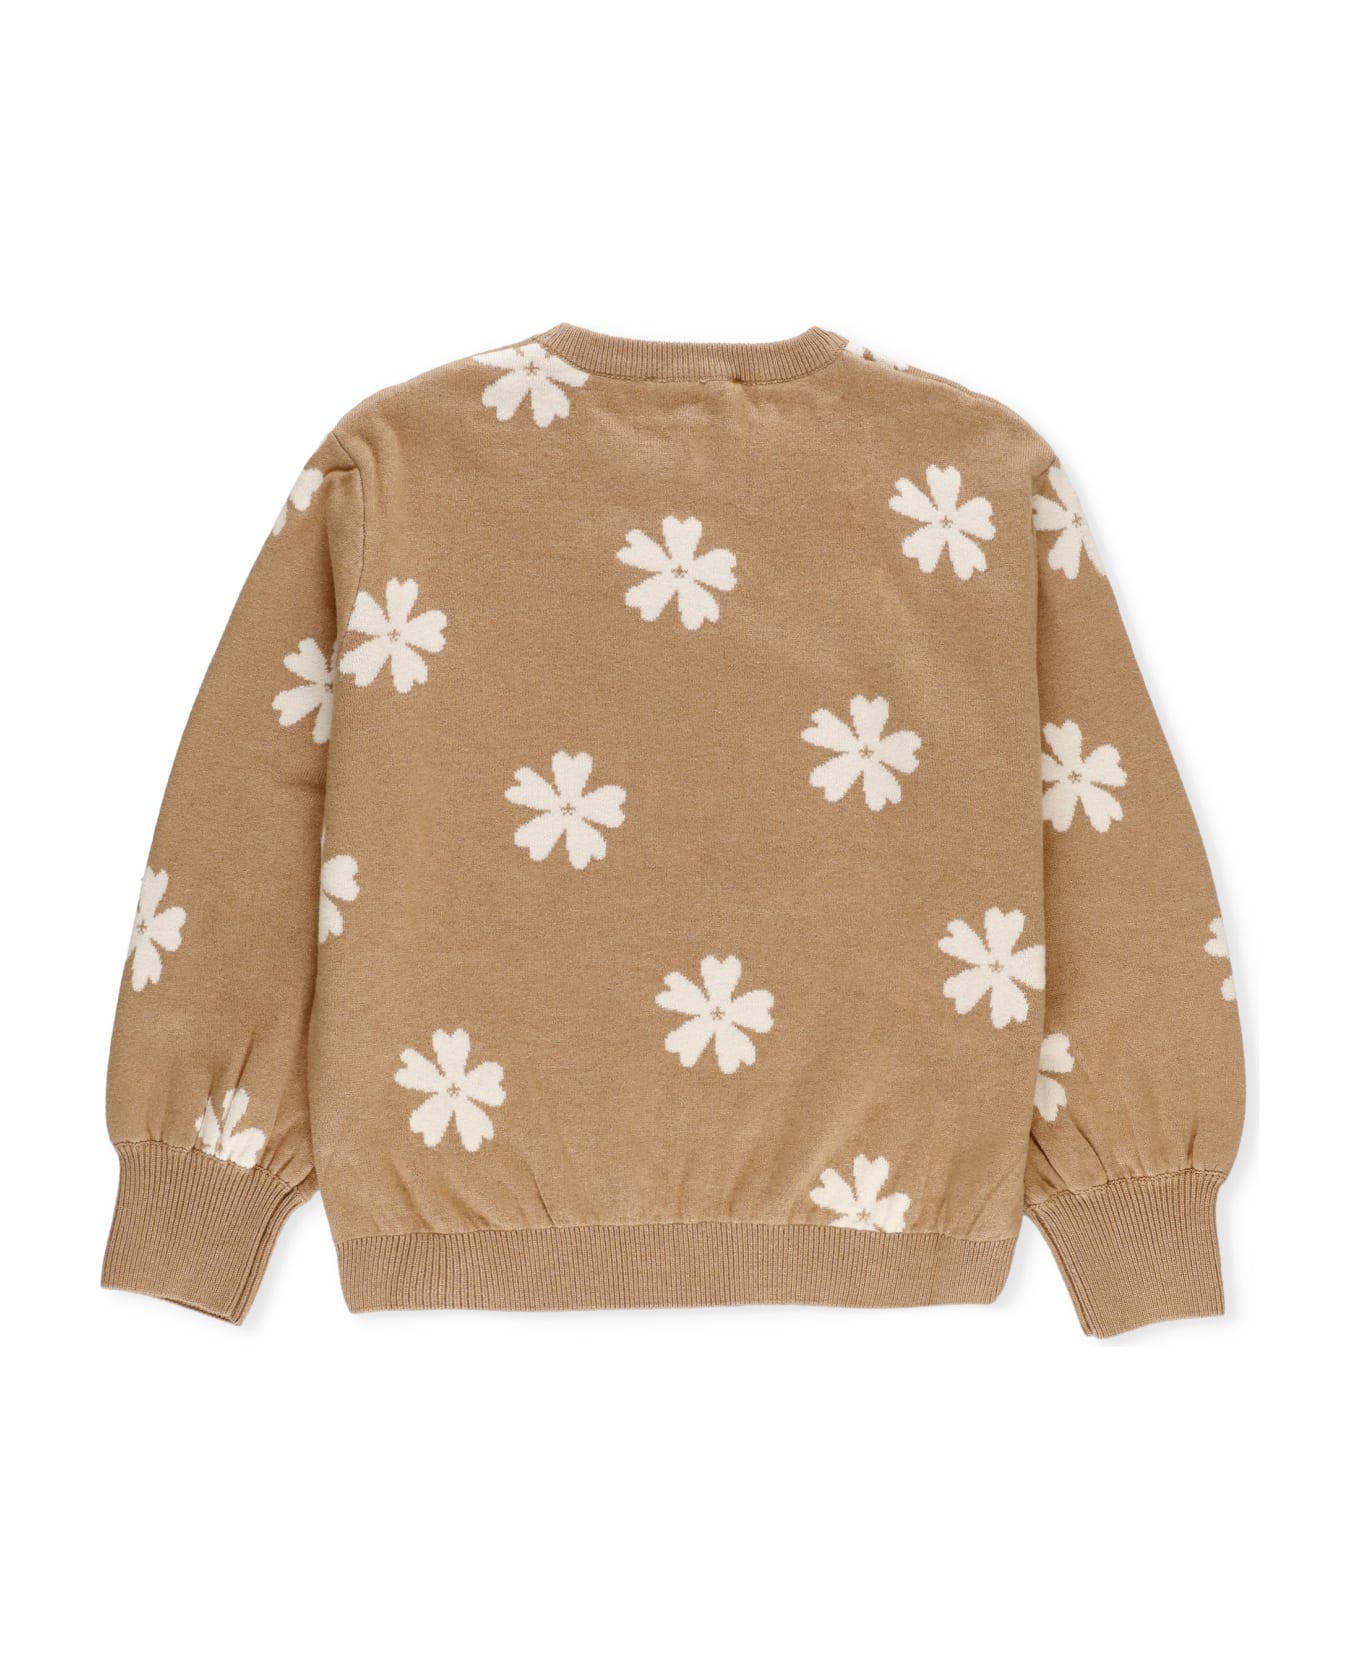 Chloé Cotton And Wool Sweater - Brown